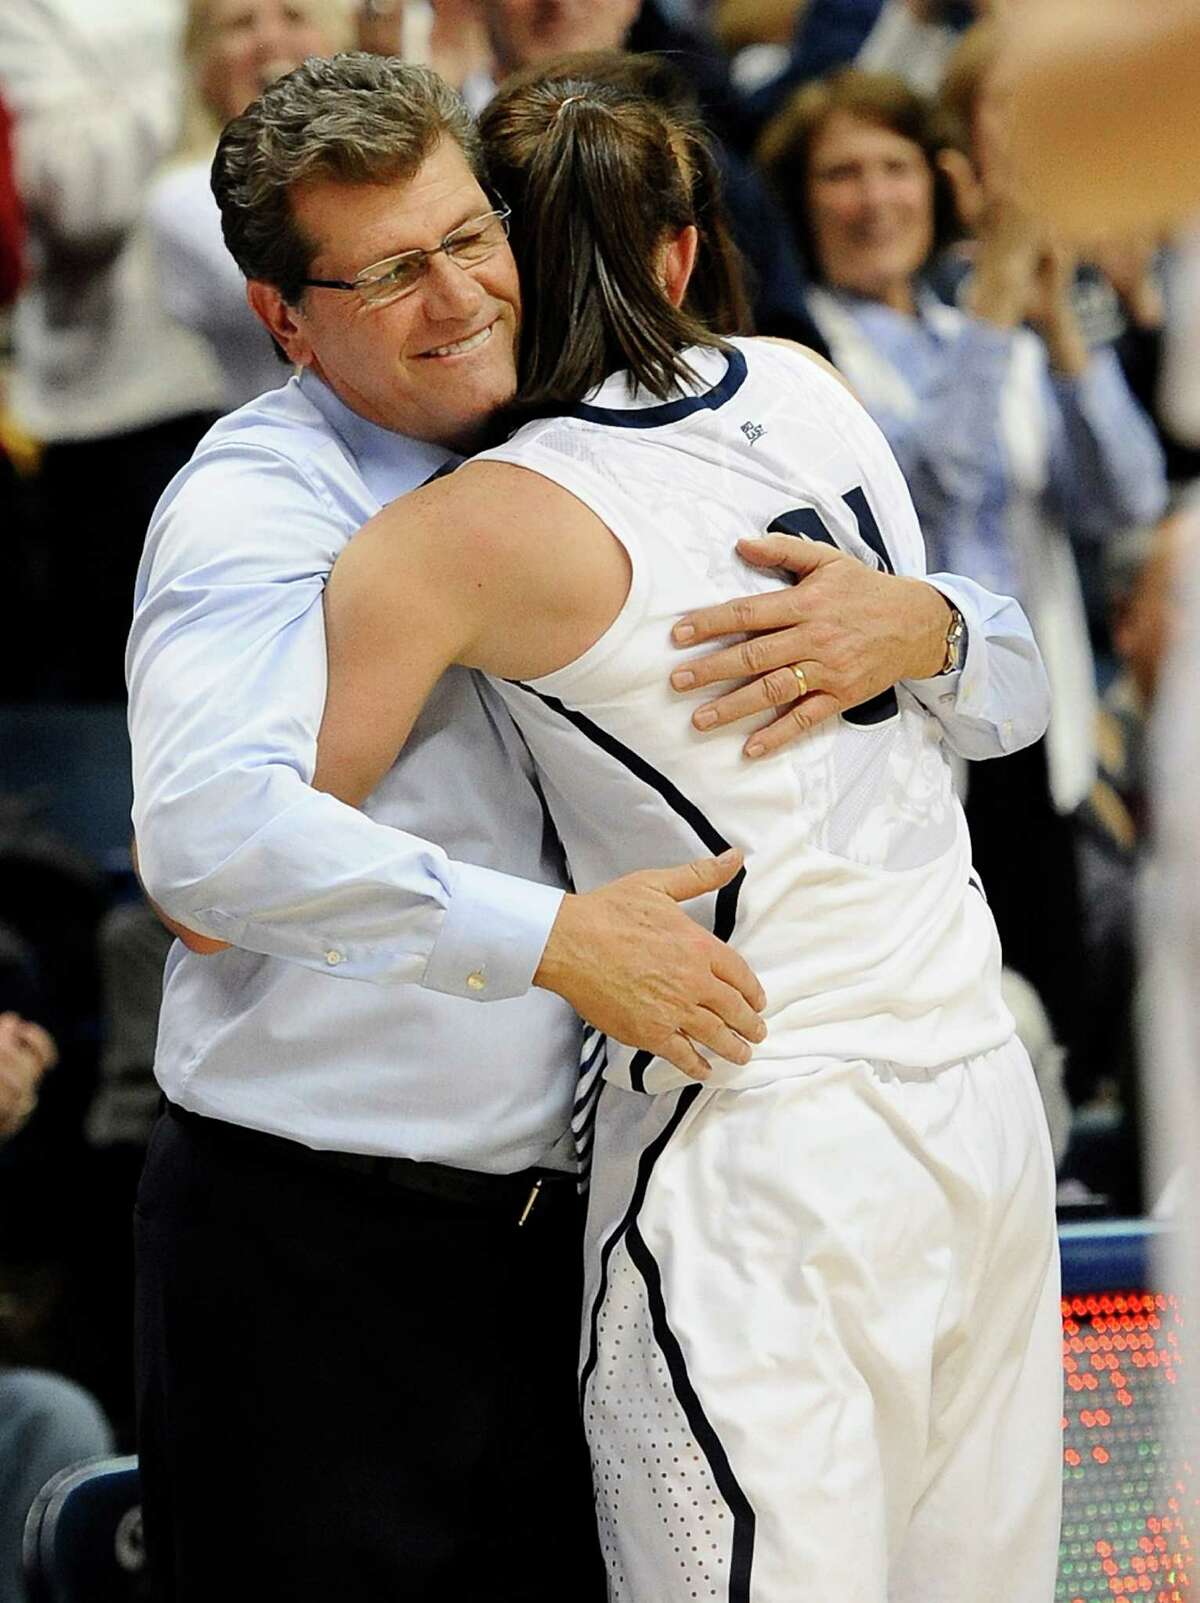 Connecticut coach Geno Auriemma, left, hugs Connecticut's Kelly Faris during the second half of an NCAA college basketball game in Storrs, Conn., Monday, Jan. 21, 2013. Faris had 18 points and 12 rebounds in Connecticut's 79-49 win over Duke. (AP Photo/Jessica Hill)